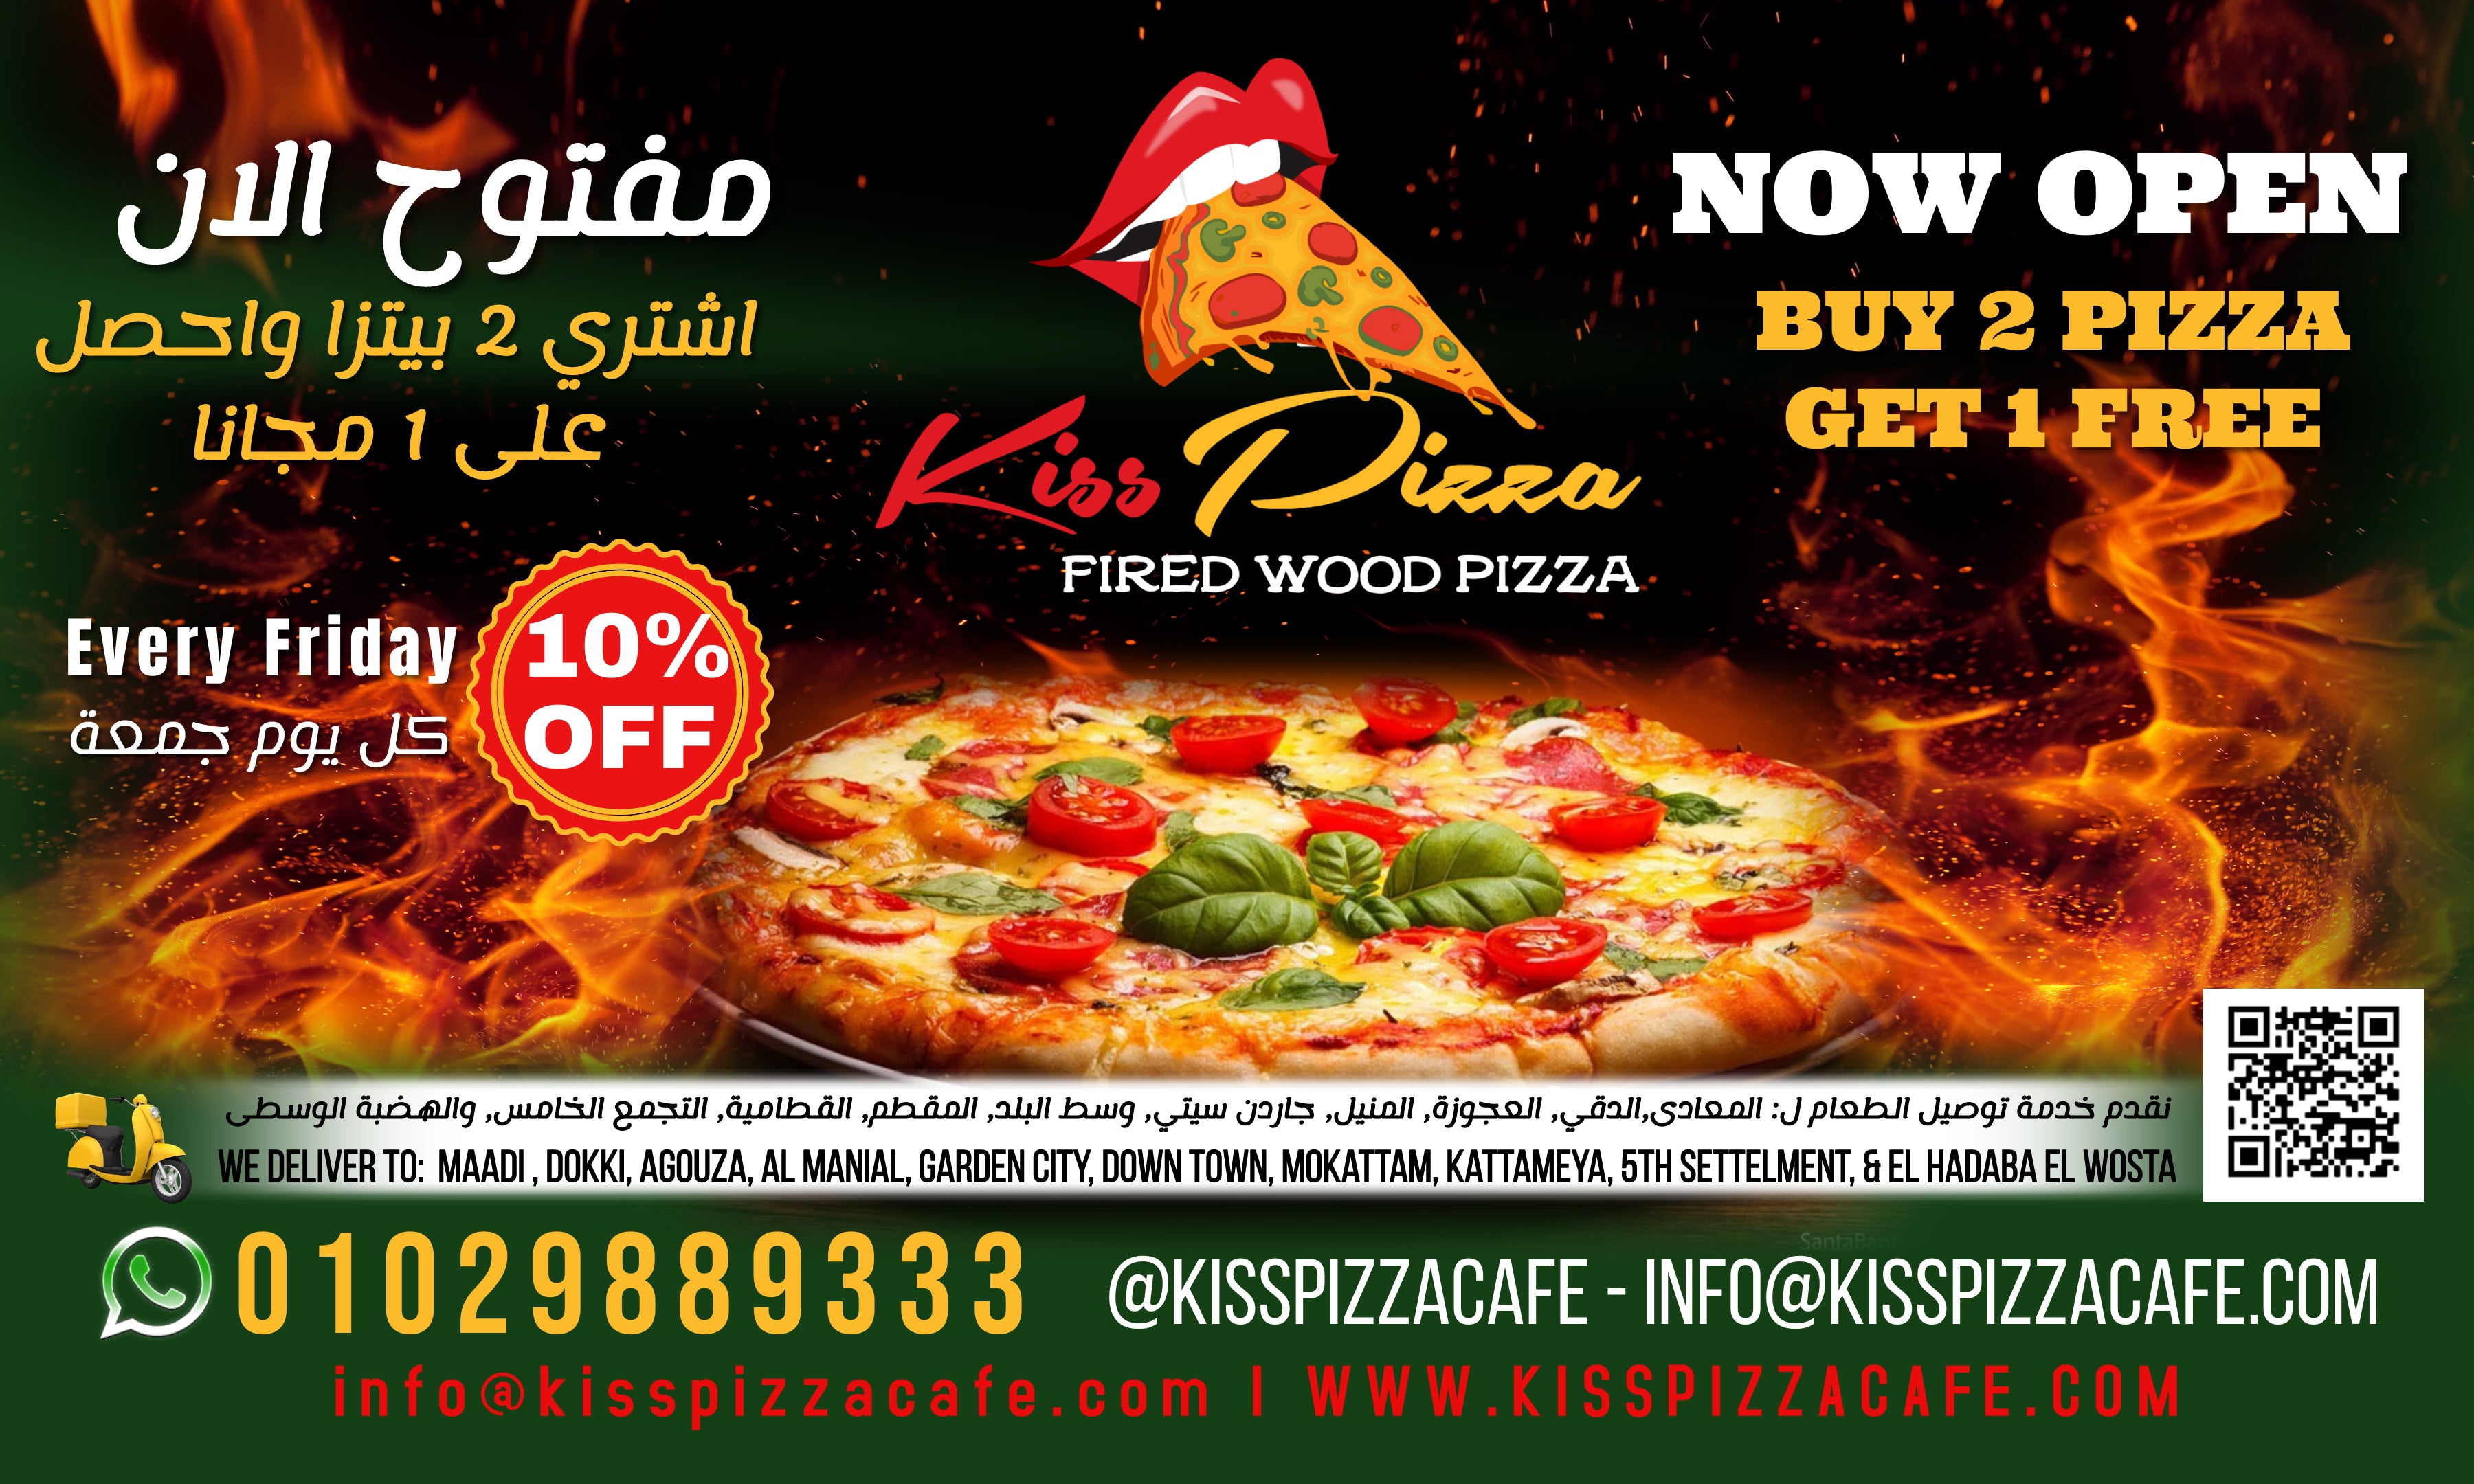 Buy 2 Pizza And Get 1 Free Offer Last Till 30th Of May